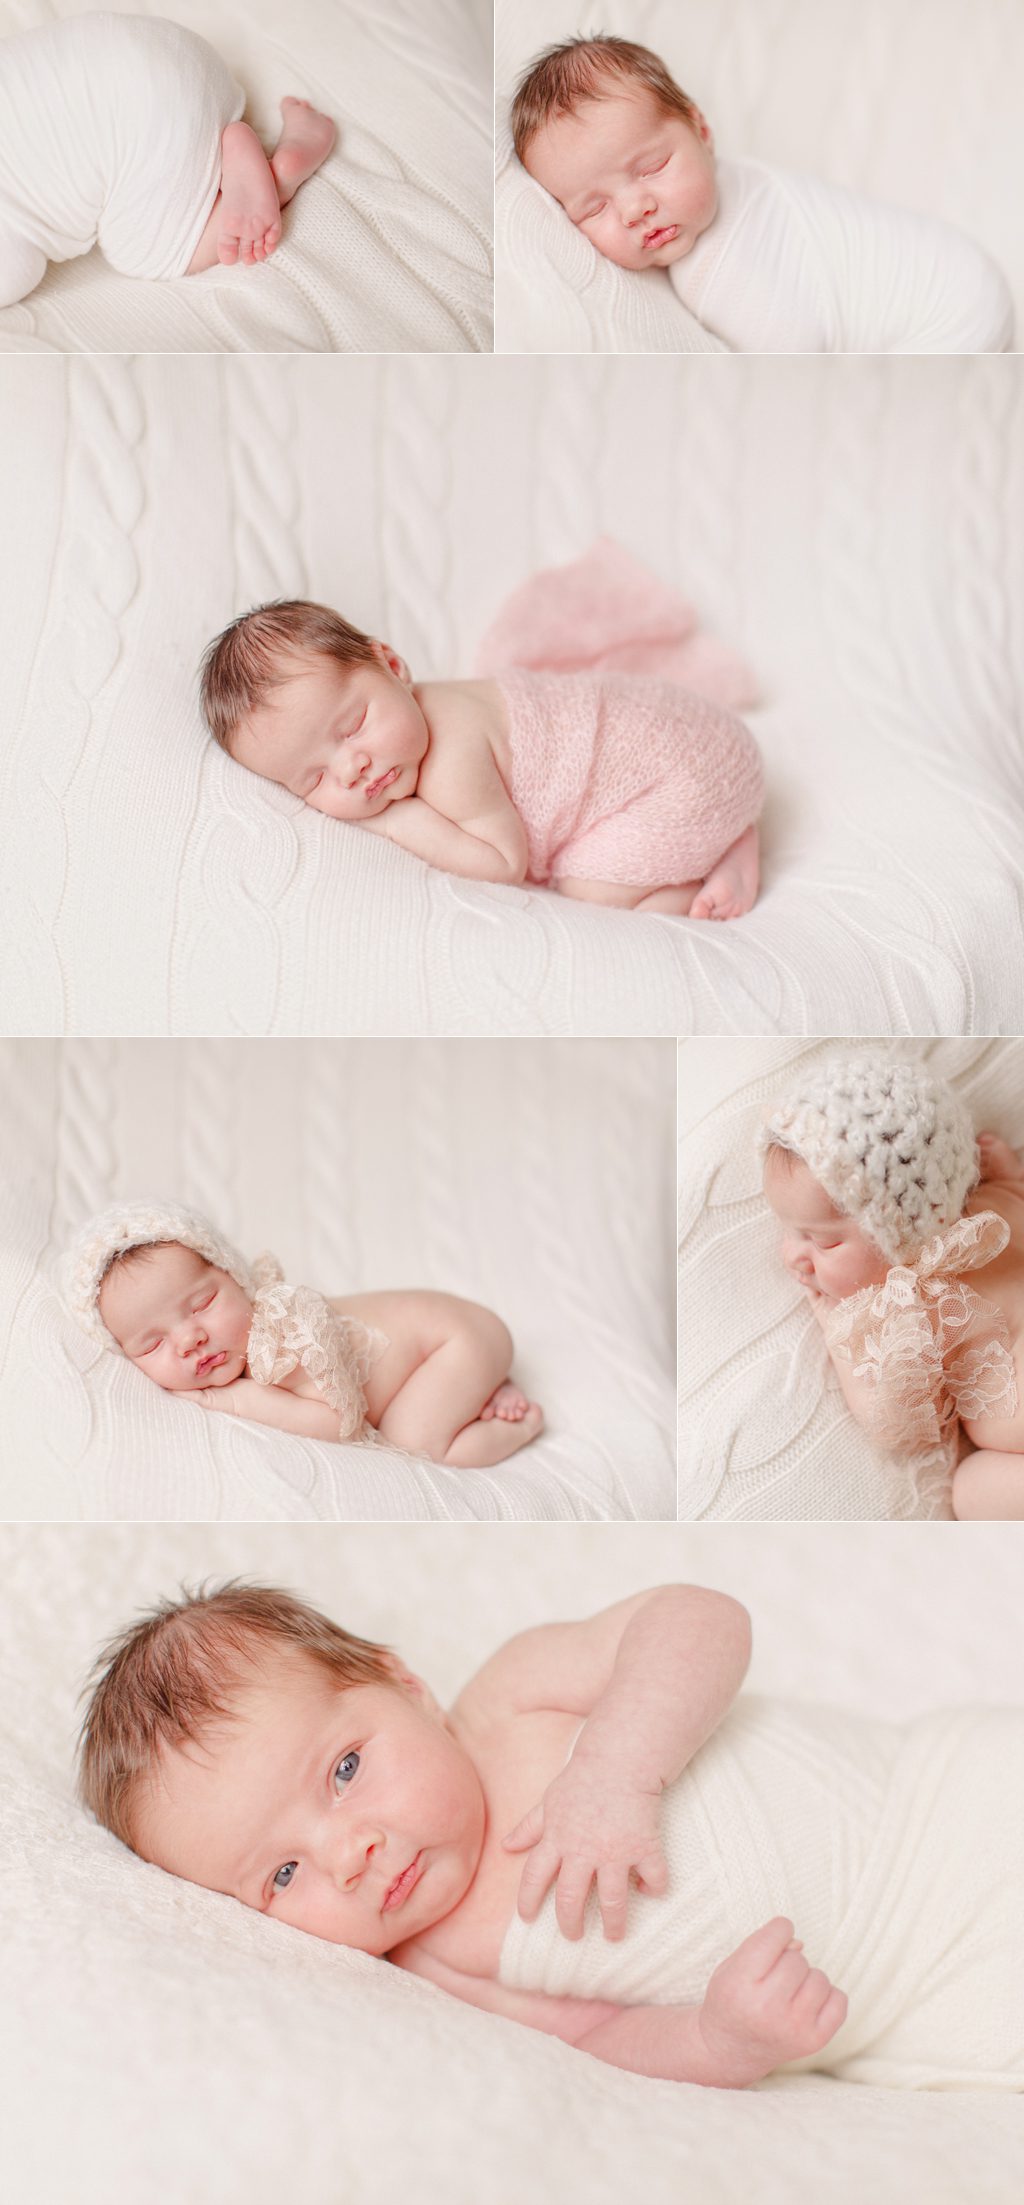 One month old infant portraits in St. Louis.